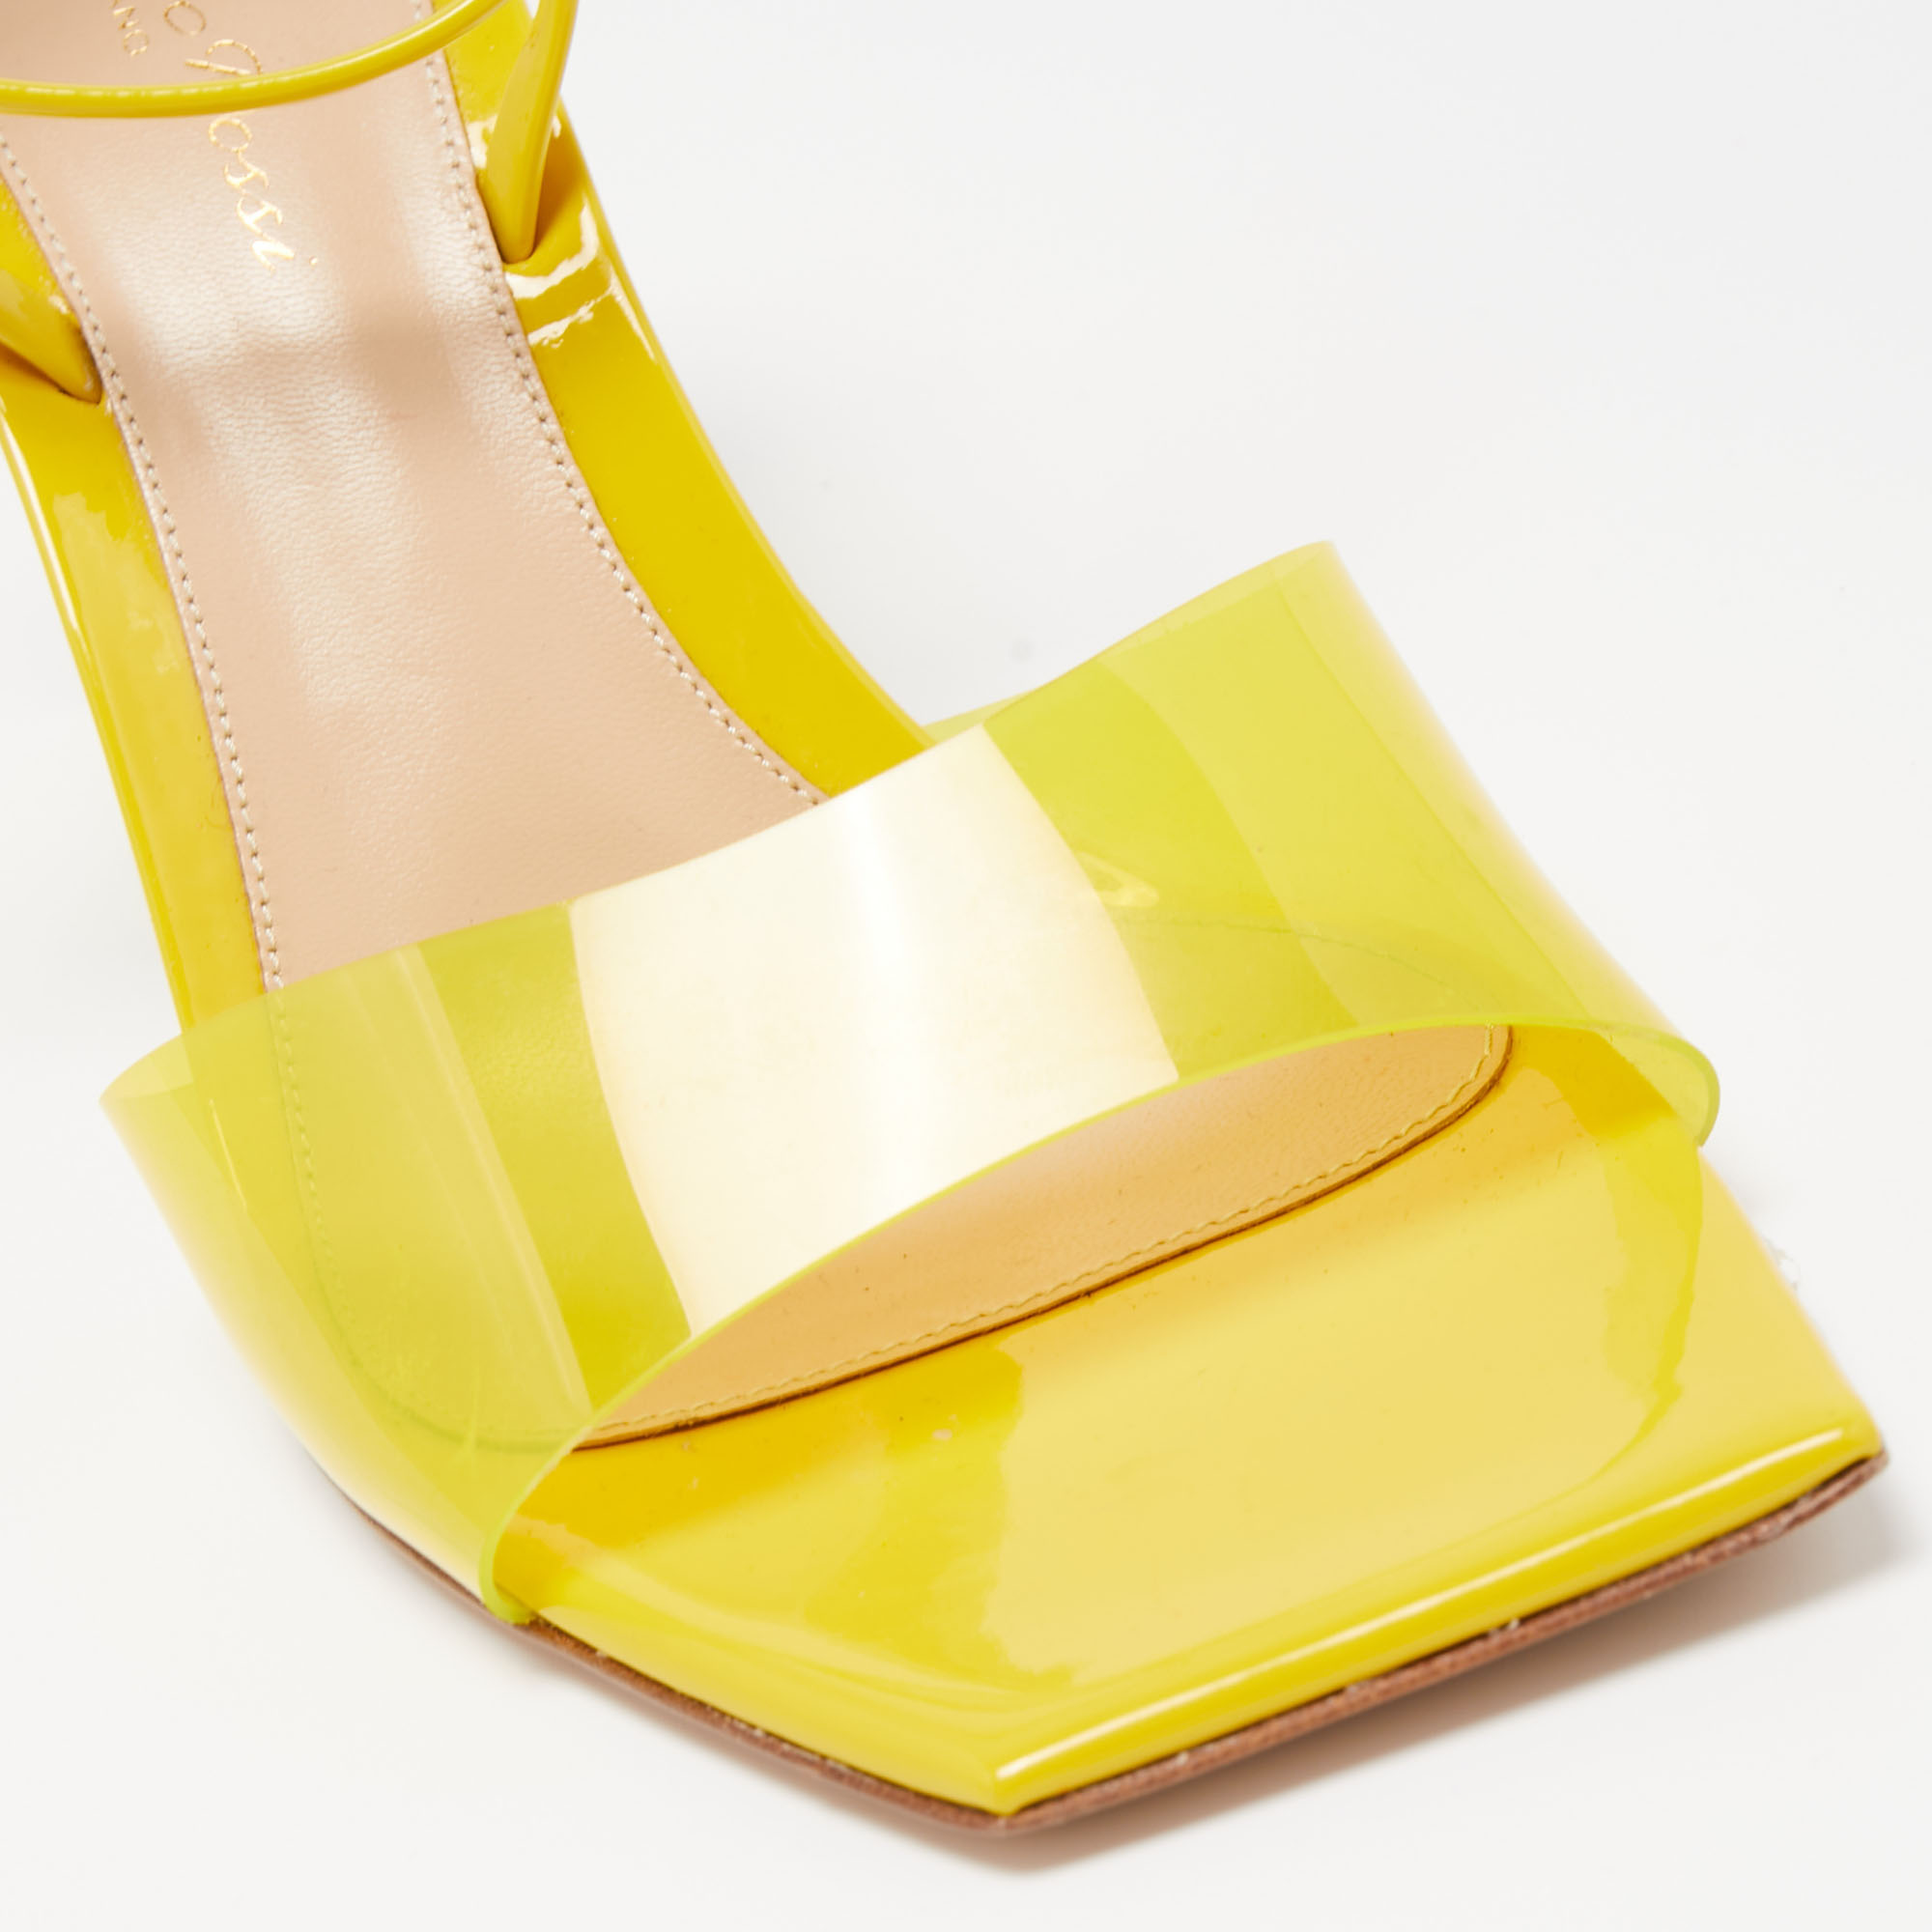 Gianvito Rossi Yellow Patent And PVC Ankle Wrap Sandals Size 38